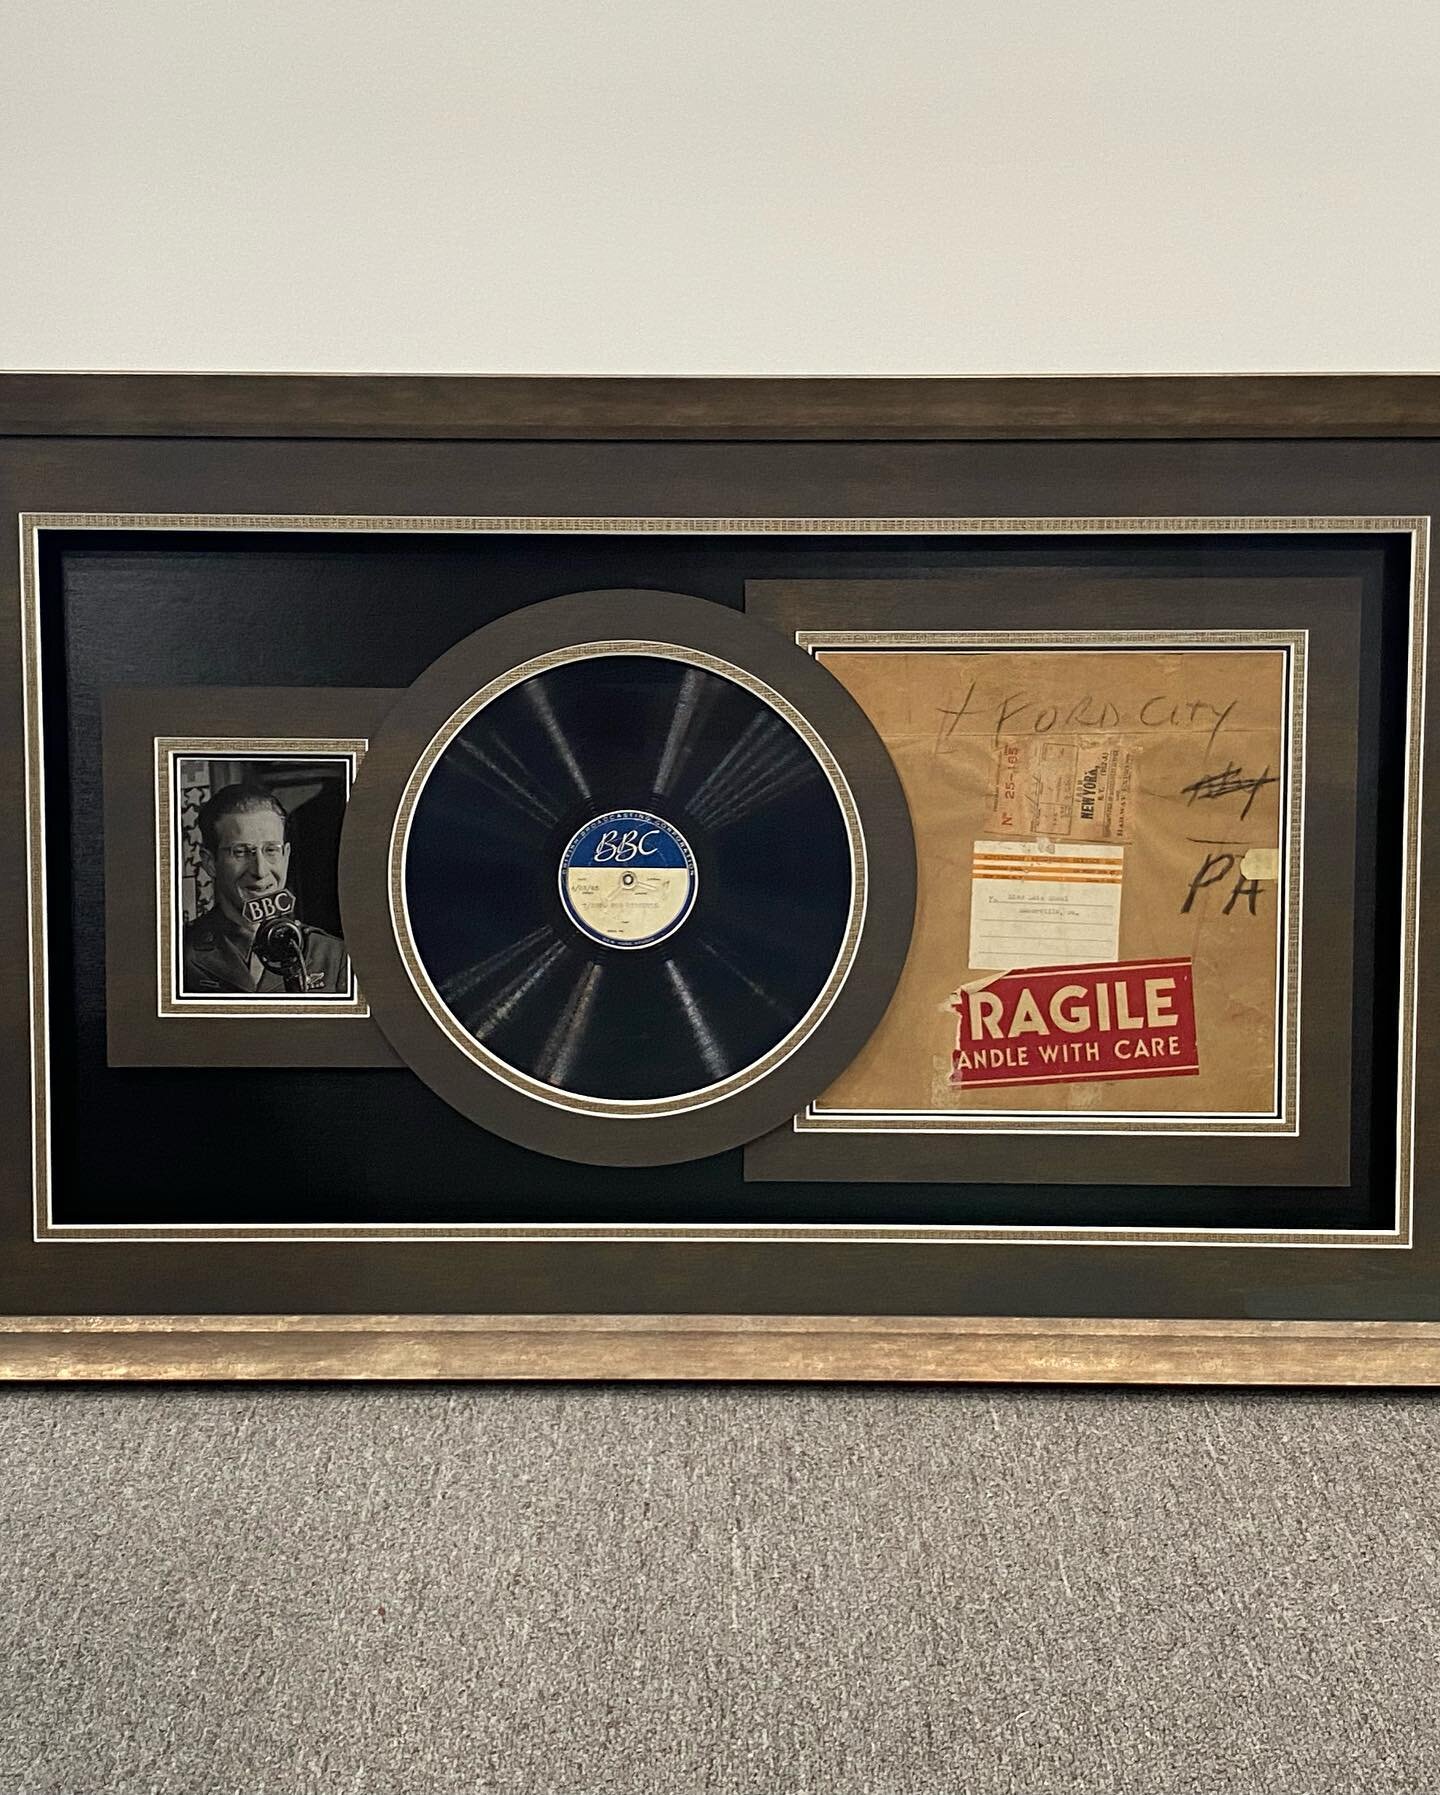 Vintage BBC broadcast recording of beloved father preserved. Textured mats and muted gold textured frame. Showcase your story. #harfordcounty #harfordhasit #smallbusiness #belairmdhair #mainstreetbelair #imhereharford #downtownbelair